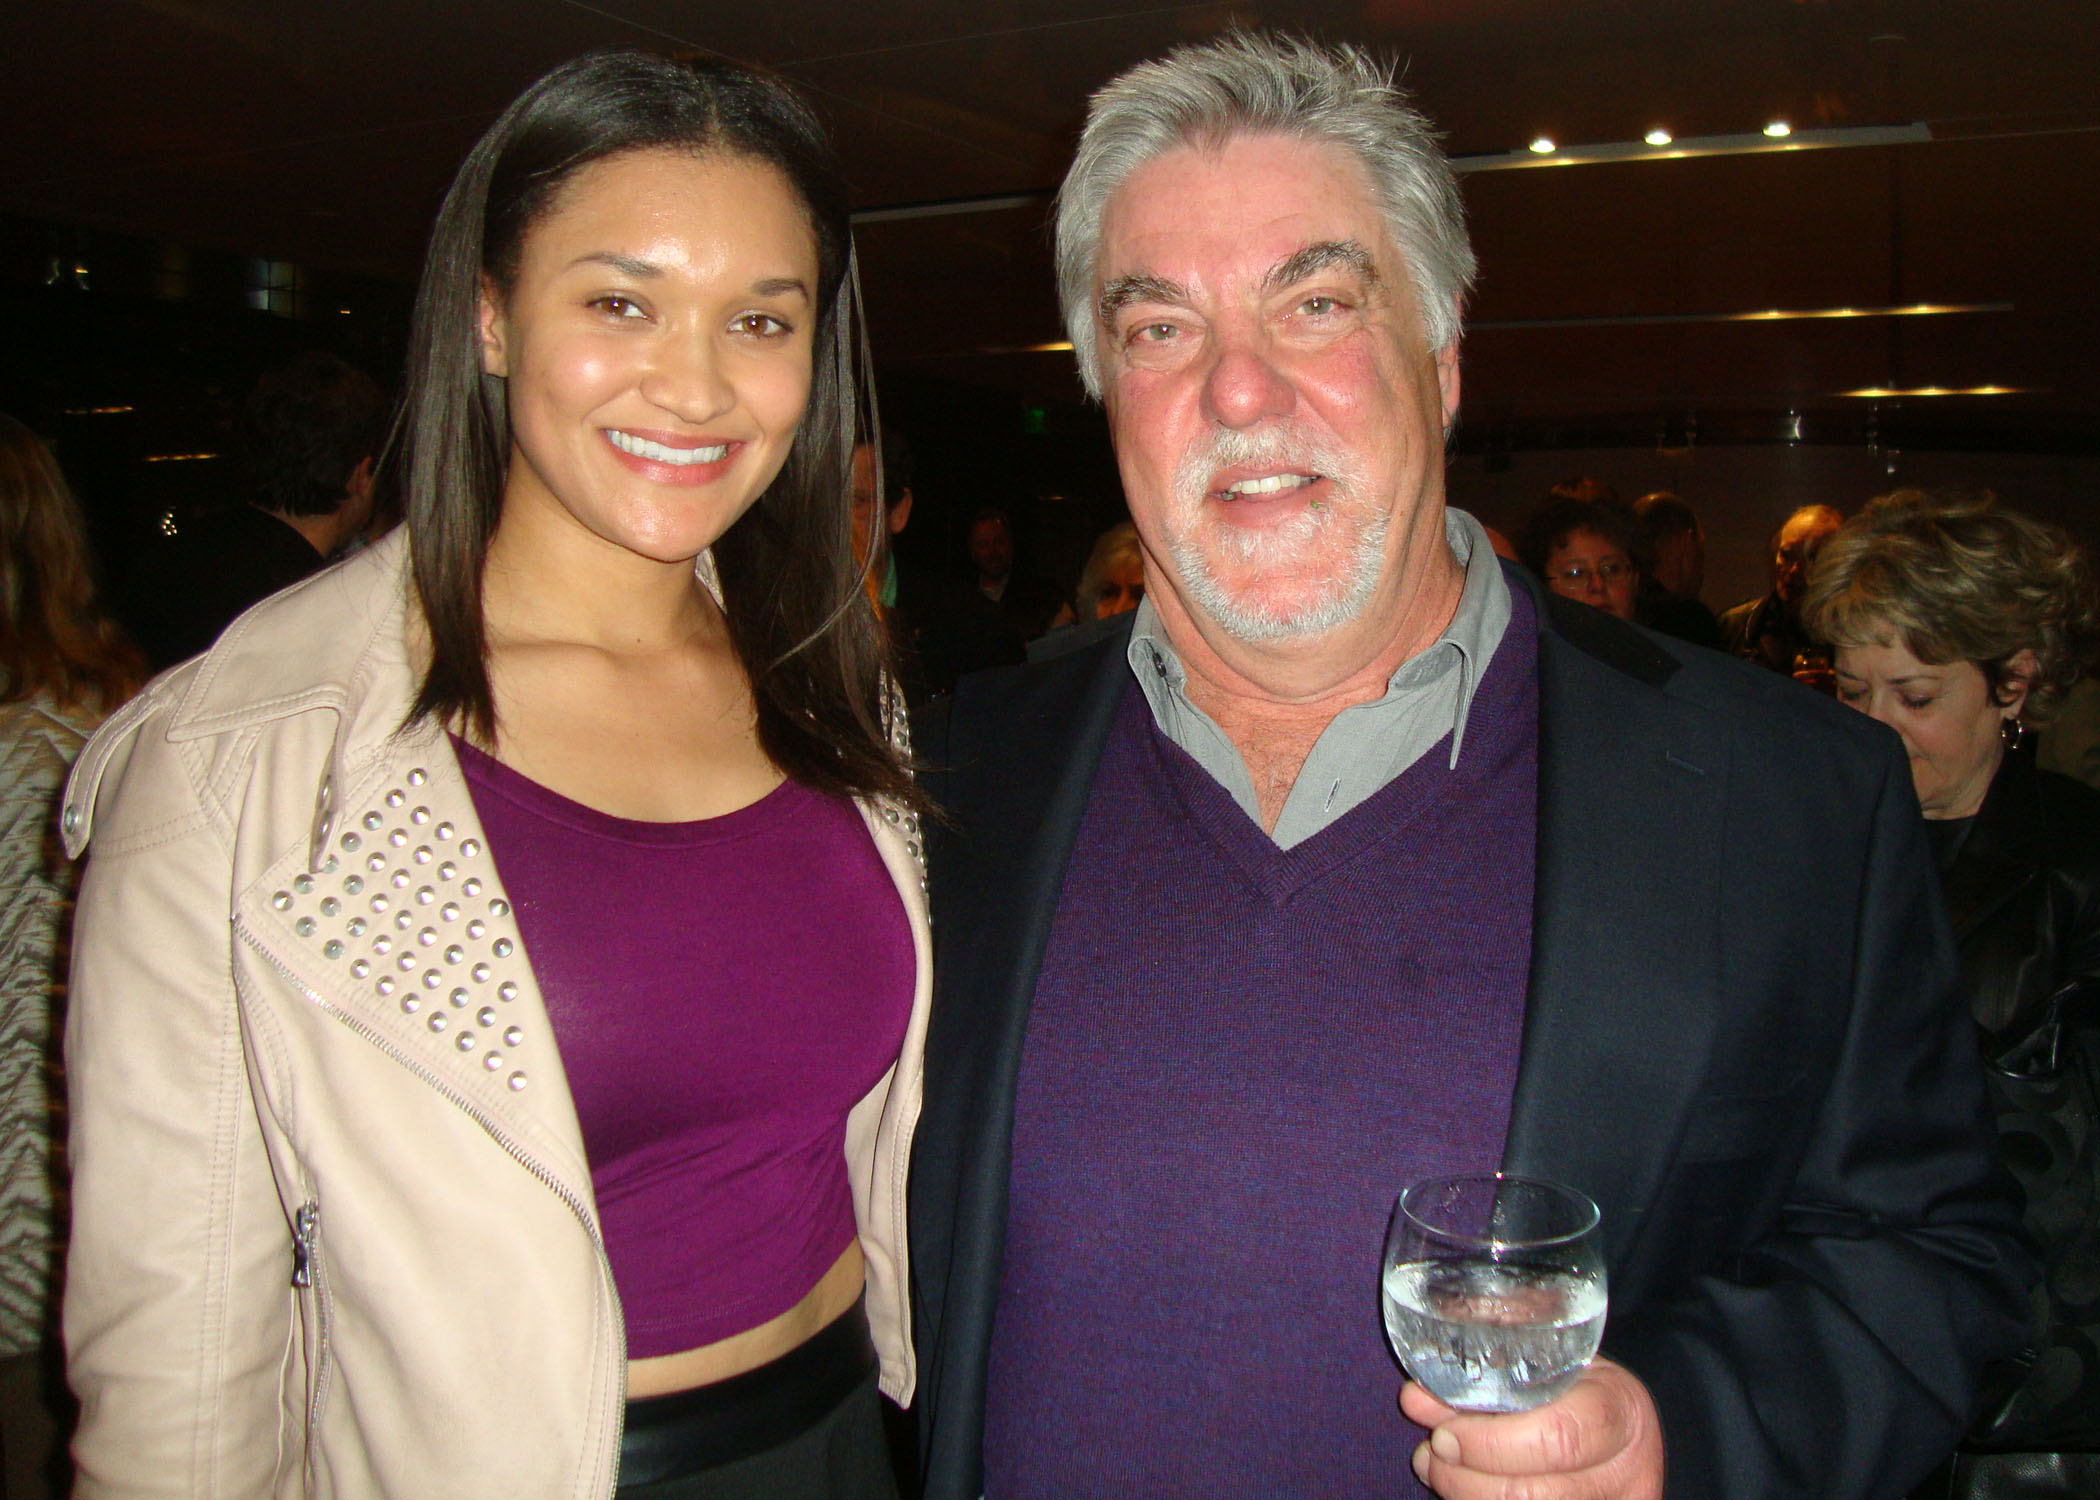 Etalvia Cashin and Bruce McGill attending the private screening of Blue Jasmine at Creative Artist's Agency in Los Angeles.